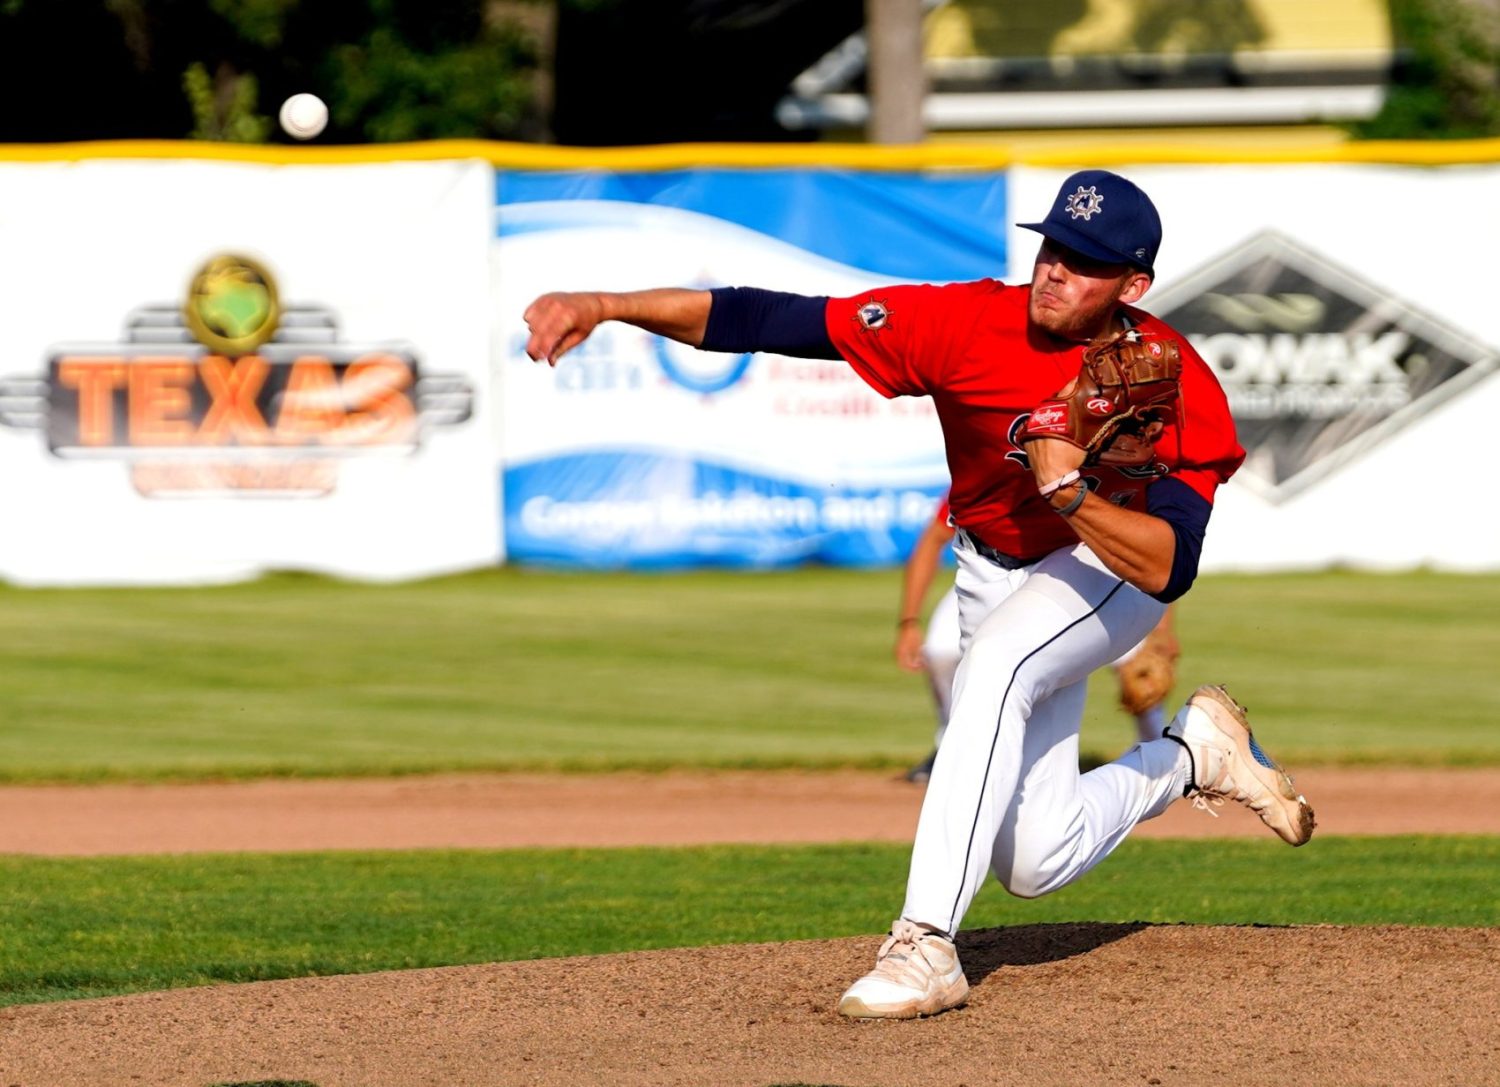 Muskegon Clippers rack up 20 runs in a wild victory over Monarchs at Marsh Field